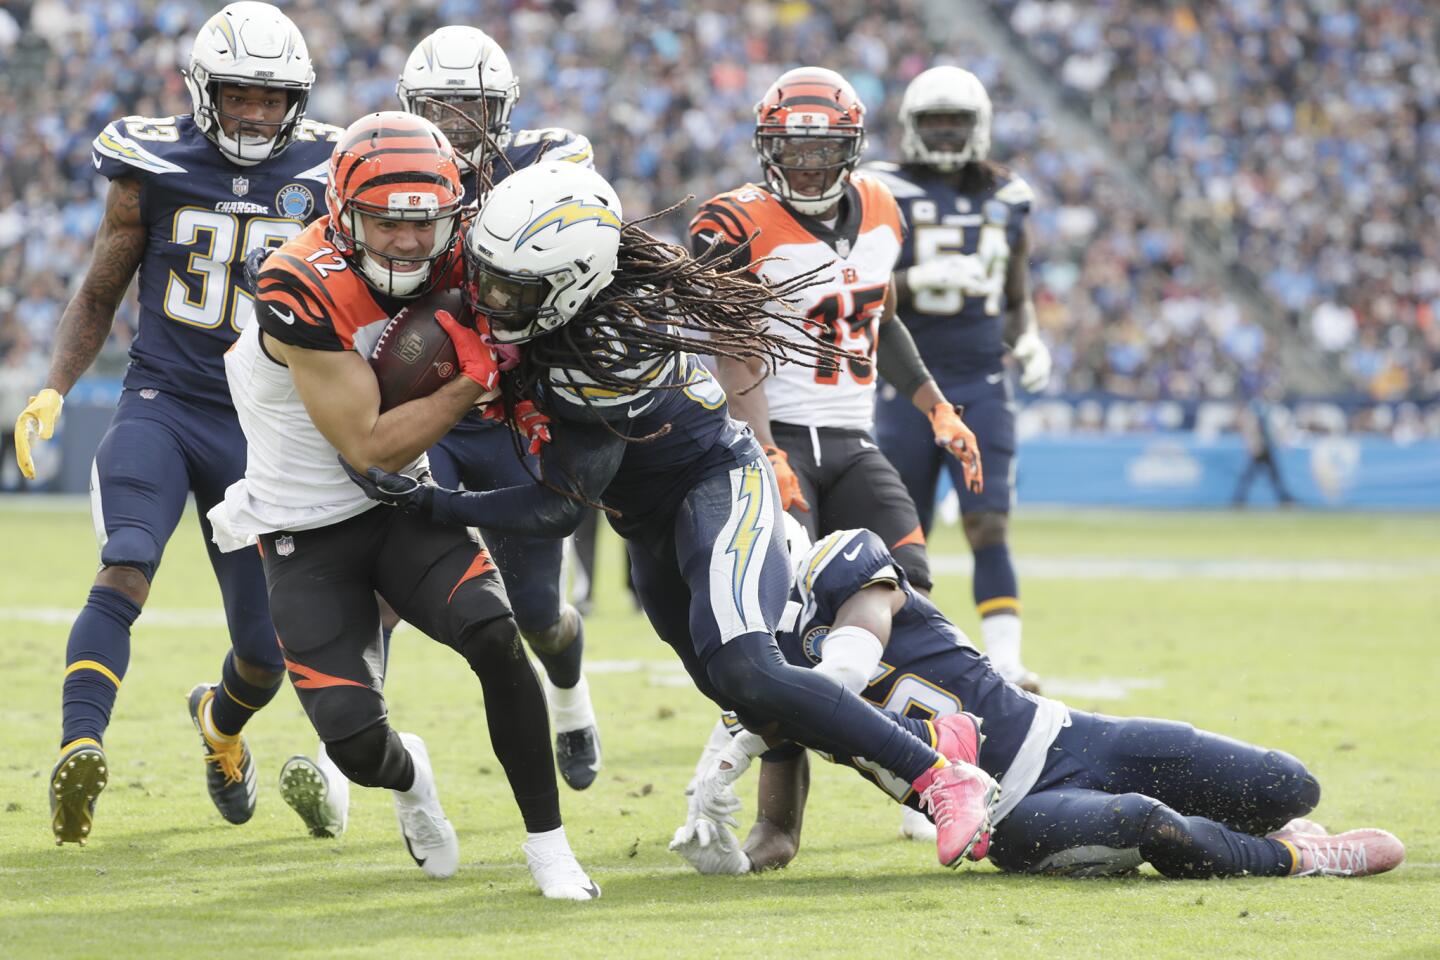 Bengals receiver Alex Erickson is tackled by Chargers safety Jahleel Addae during the second half.